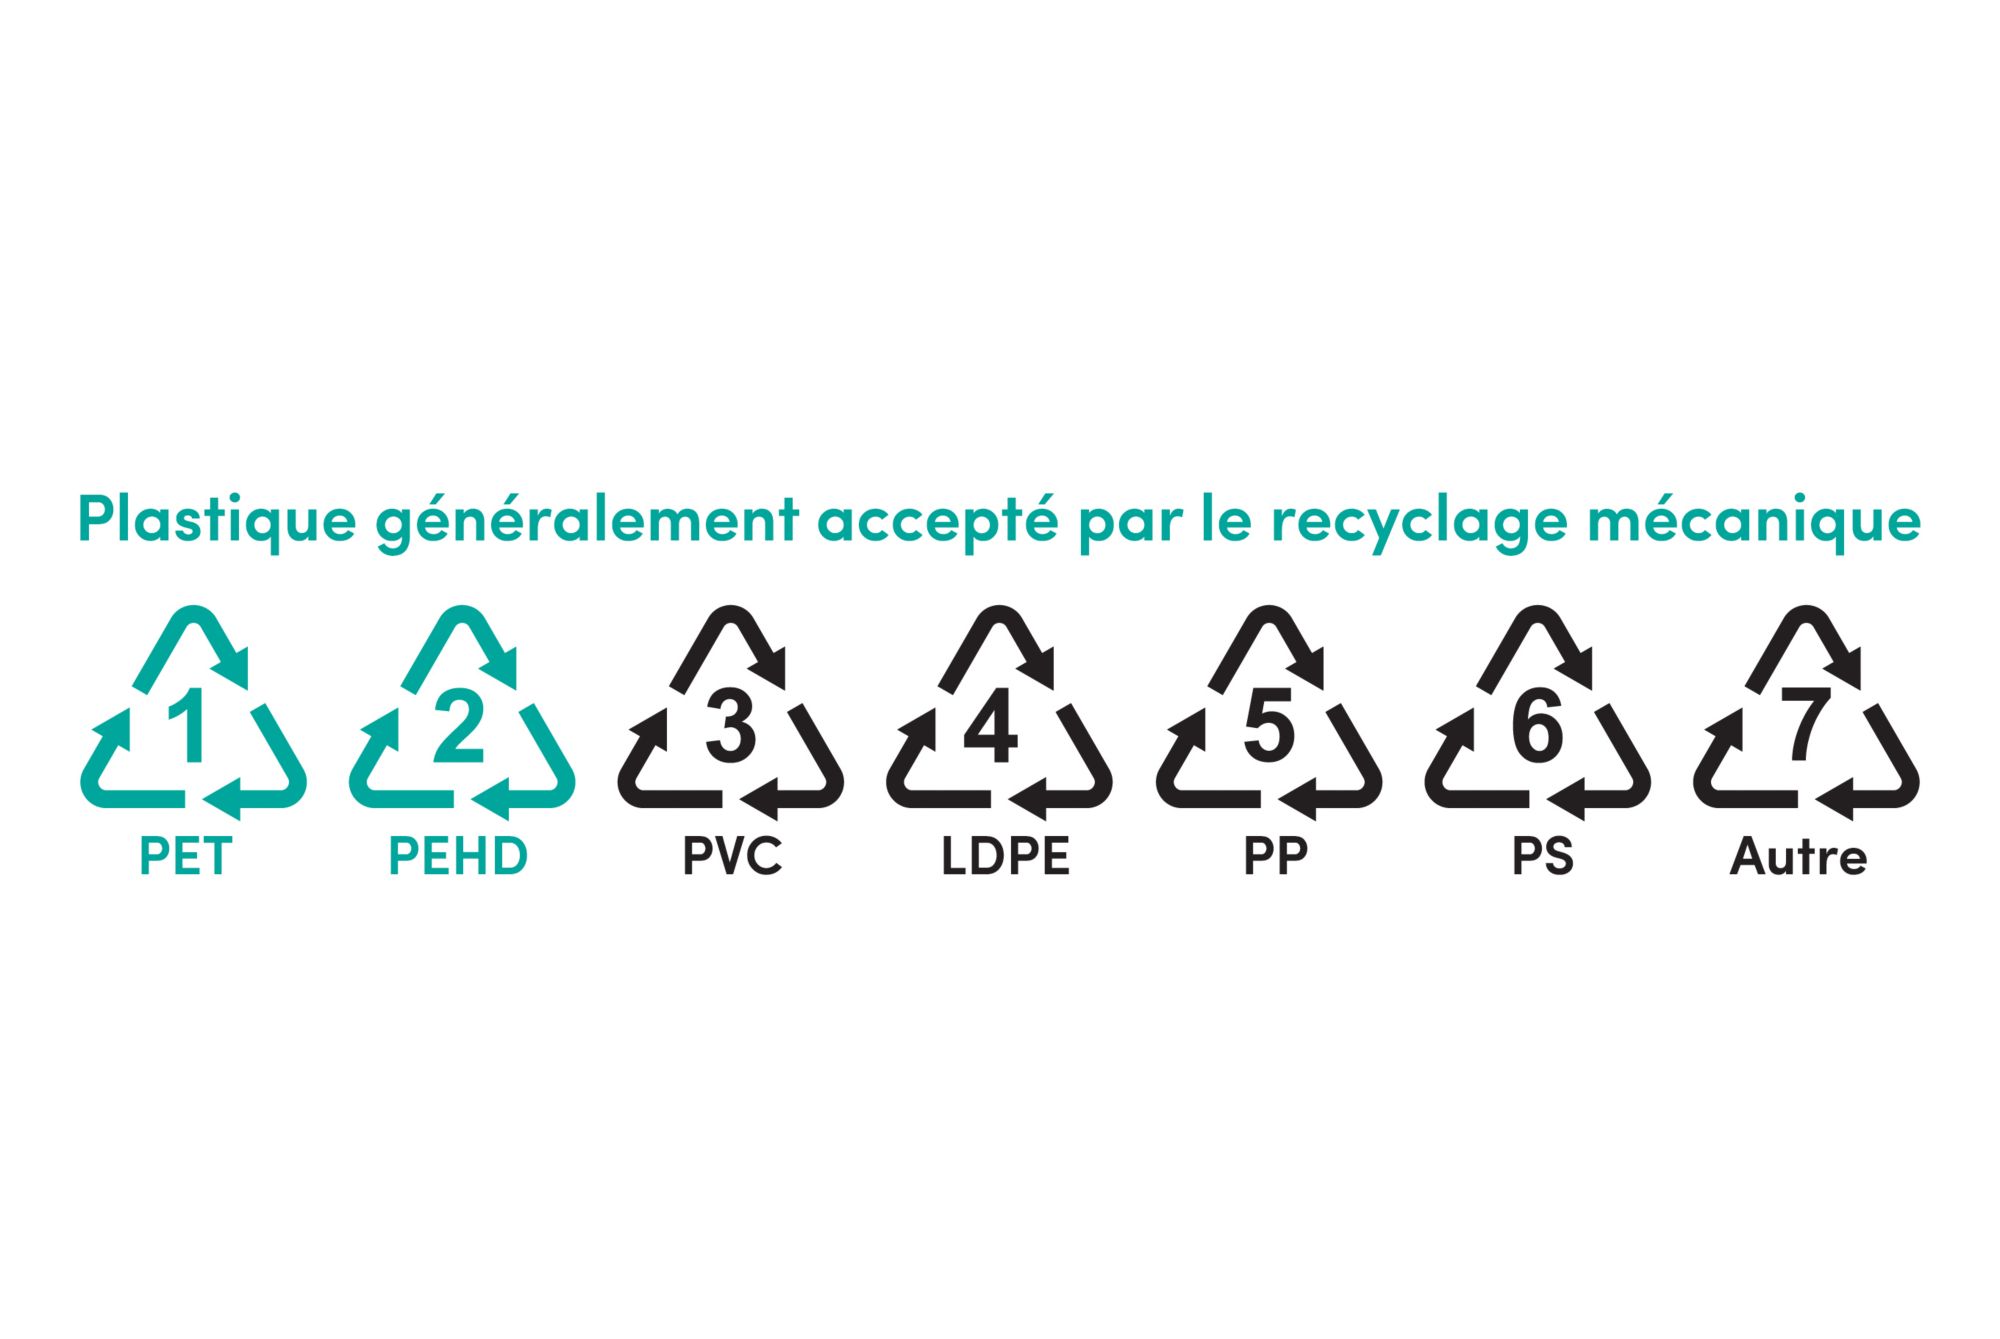 Mechanical recycling accepted plastics 